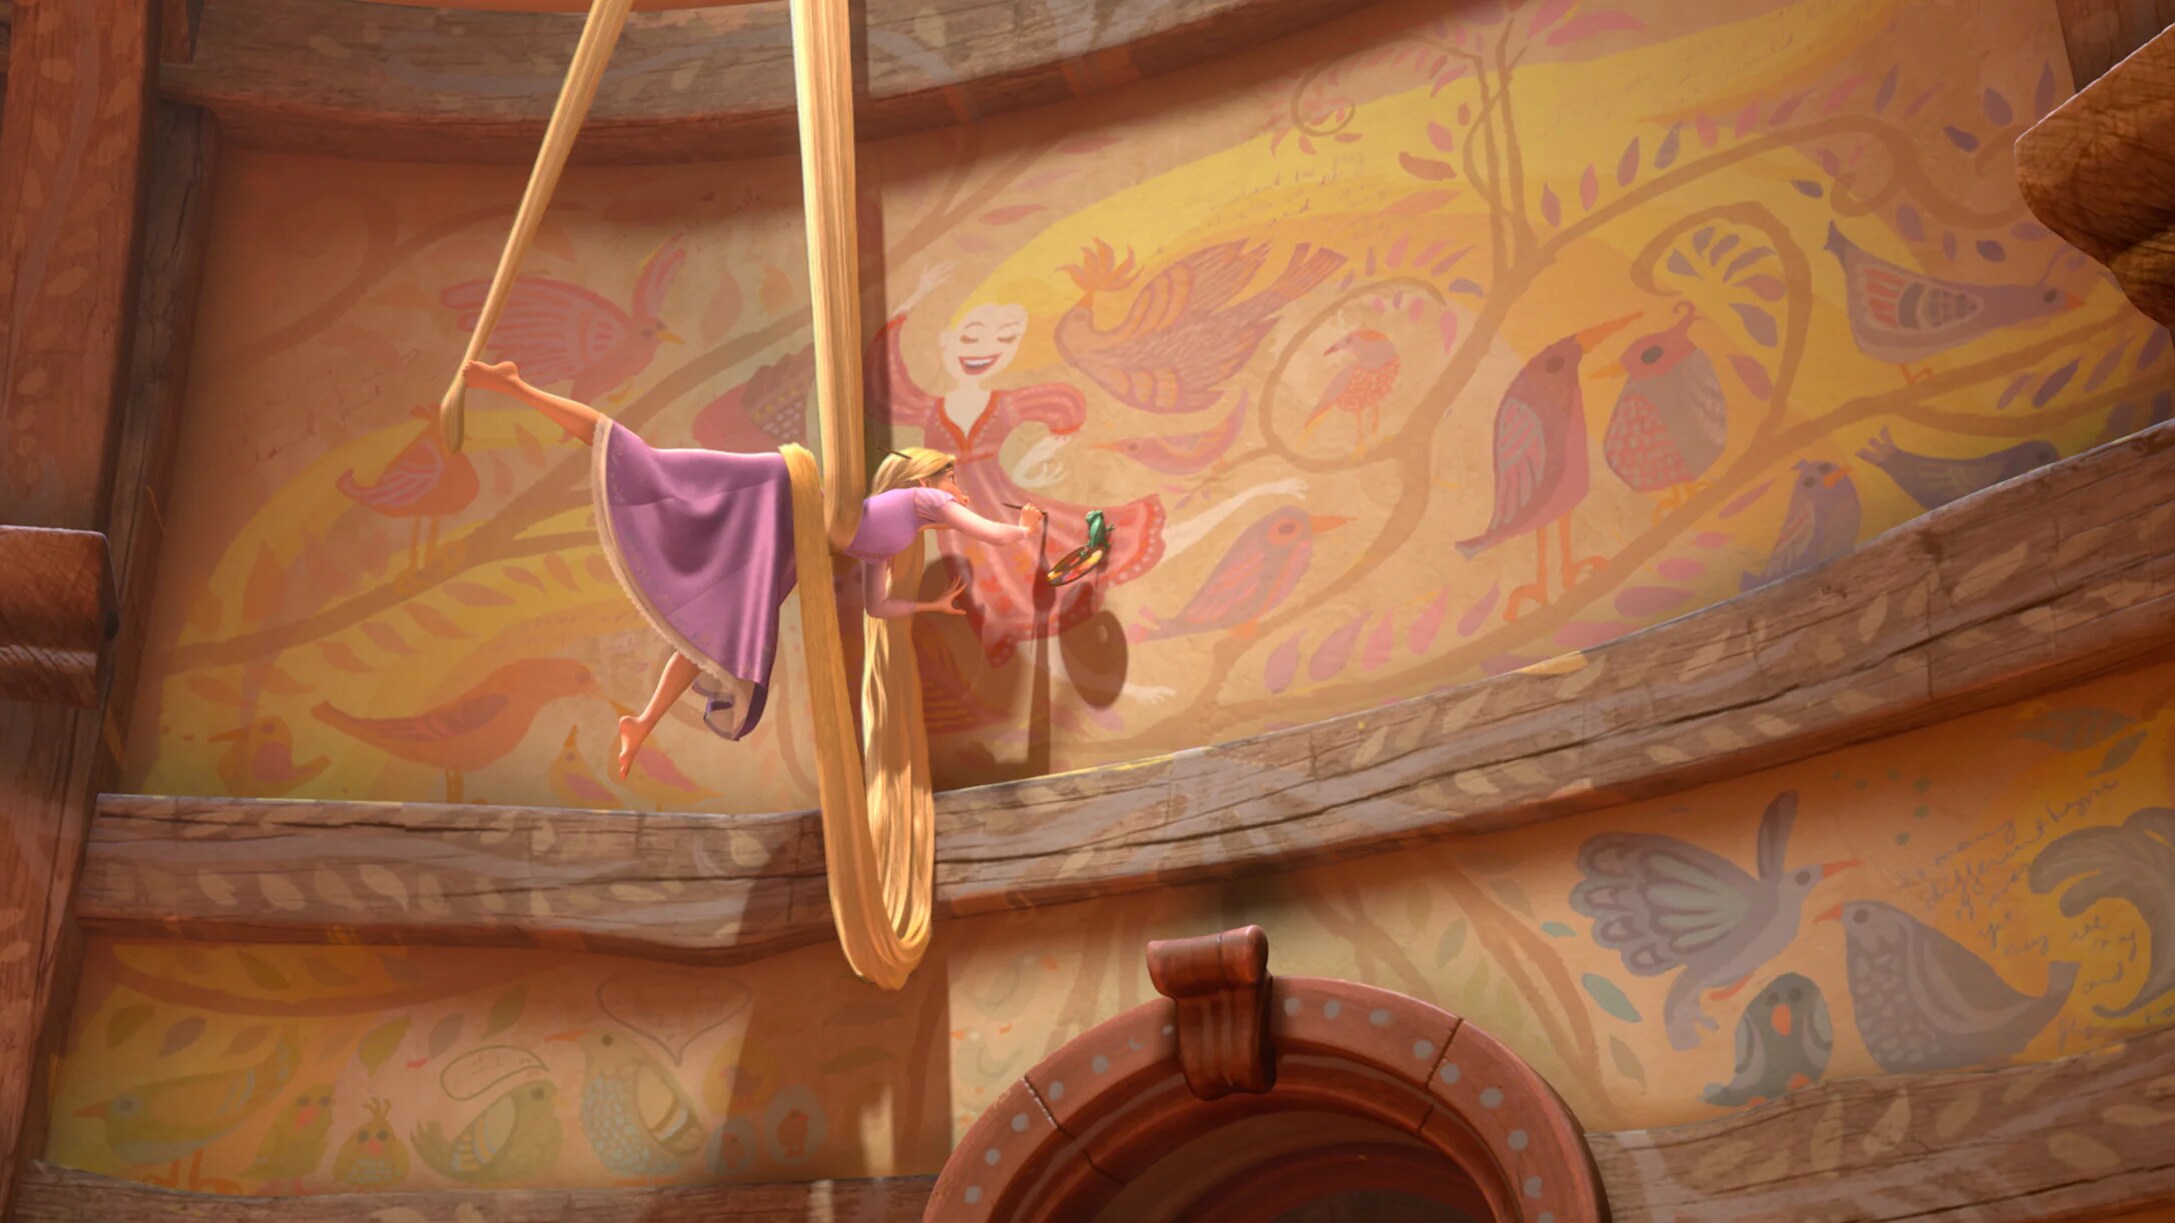 Rapunzel painting her tower with Pascal.